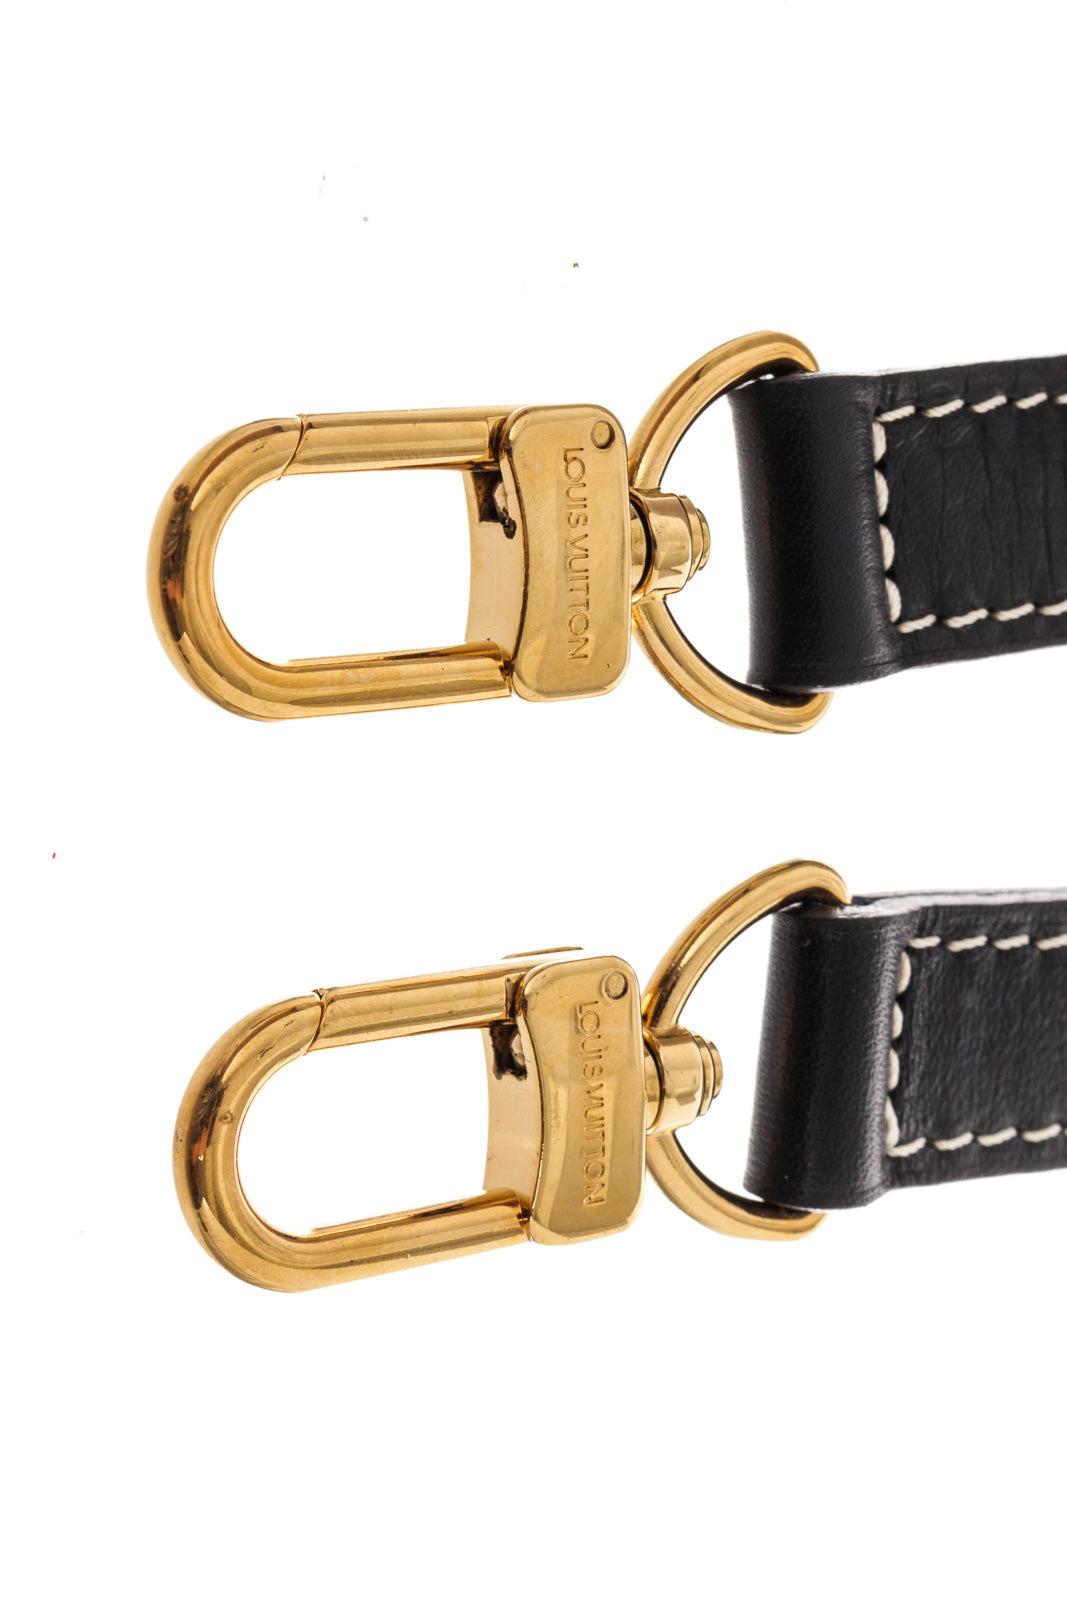 Louis Vuitton Navy Leather Extender Strap with leather, tan vachetta leather 1